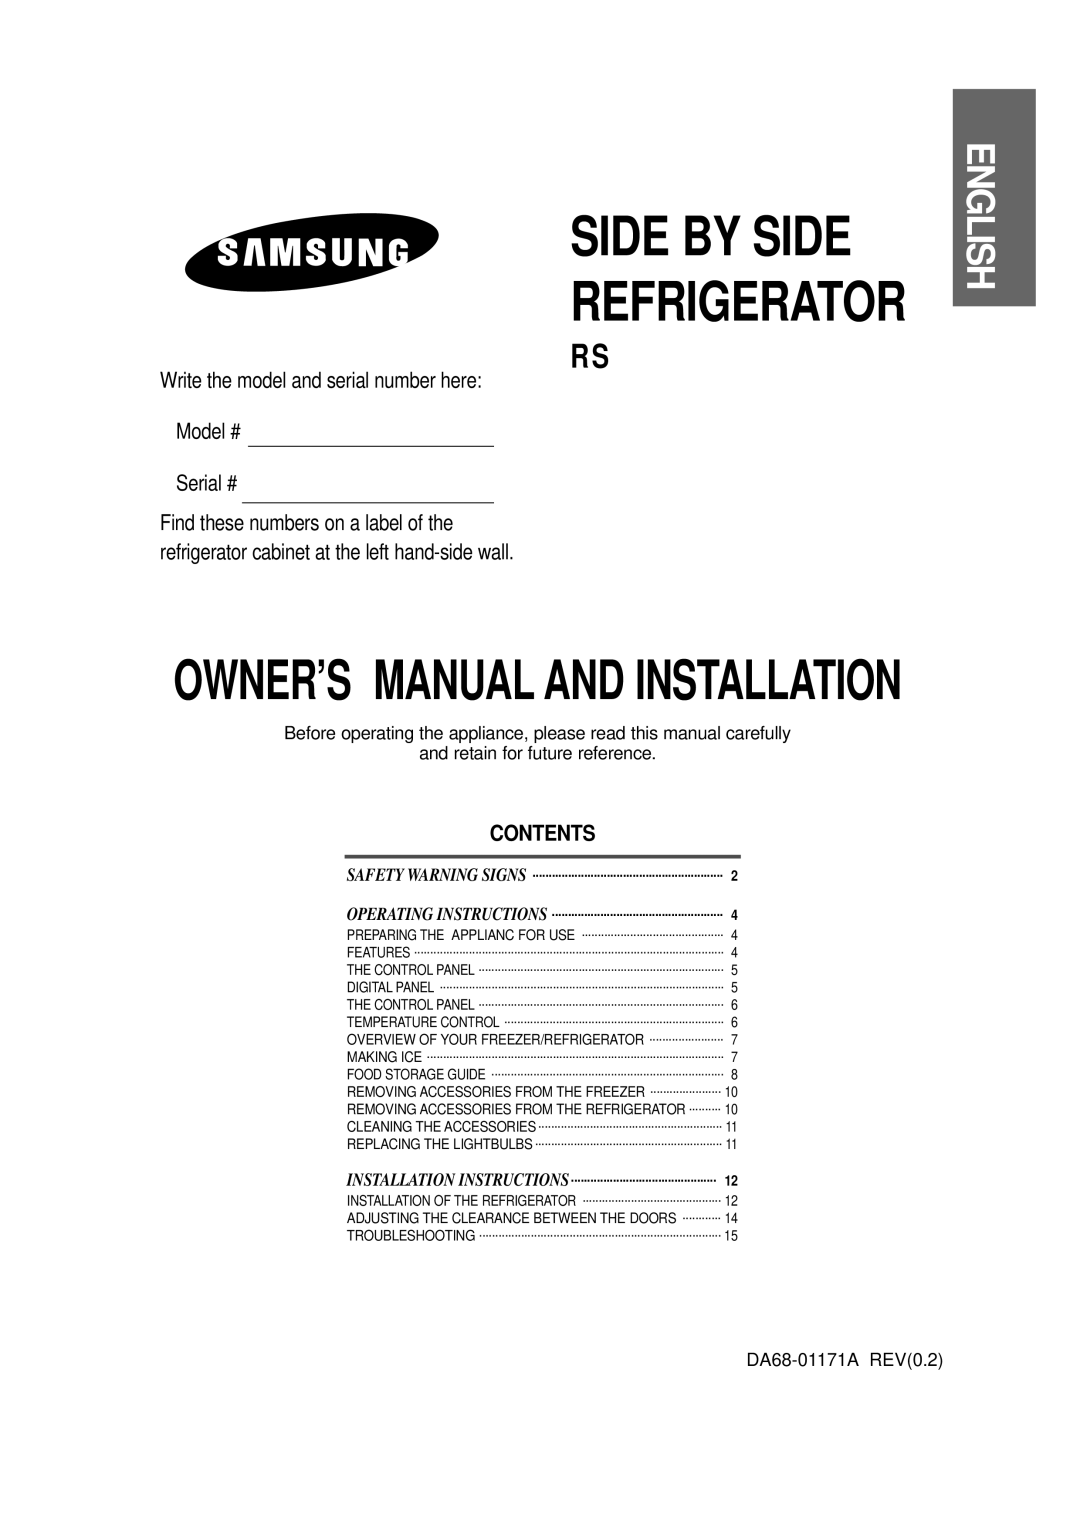 Samsung RS owner manual Contents, Side By Side Refrigerator, English, Safety Warning Signs, Operating Instructions 